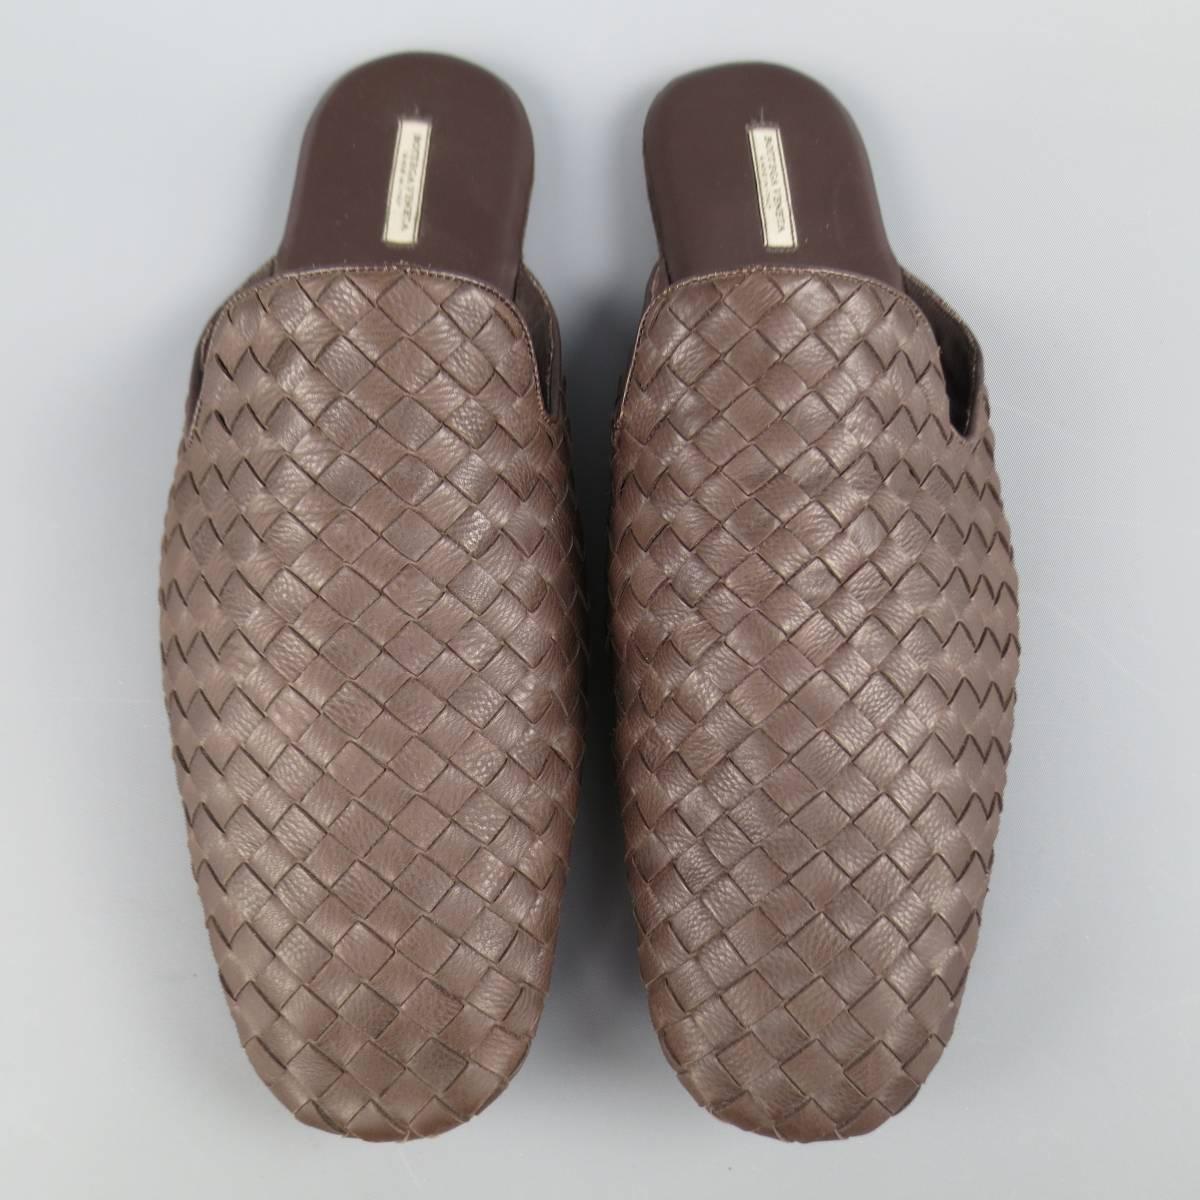 BOTTEGA VENETA loafer slippers in signature brown woven Vachetta leather featuring a squared toe and backless slip on style. Made in Italy.
 
Excellent Pre-Owned Condition.
Marked: IT 43
 
Outsole: 12 x 4 in.